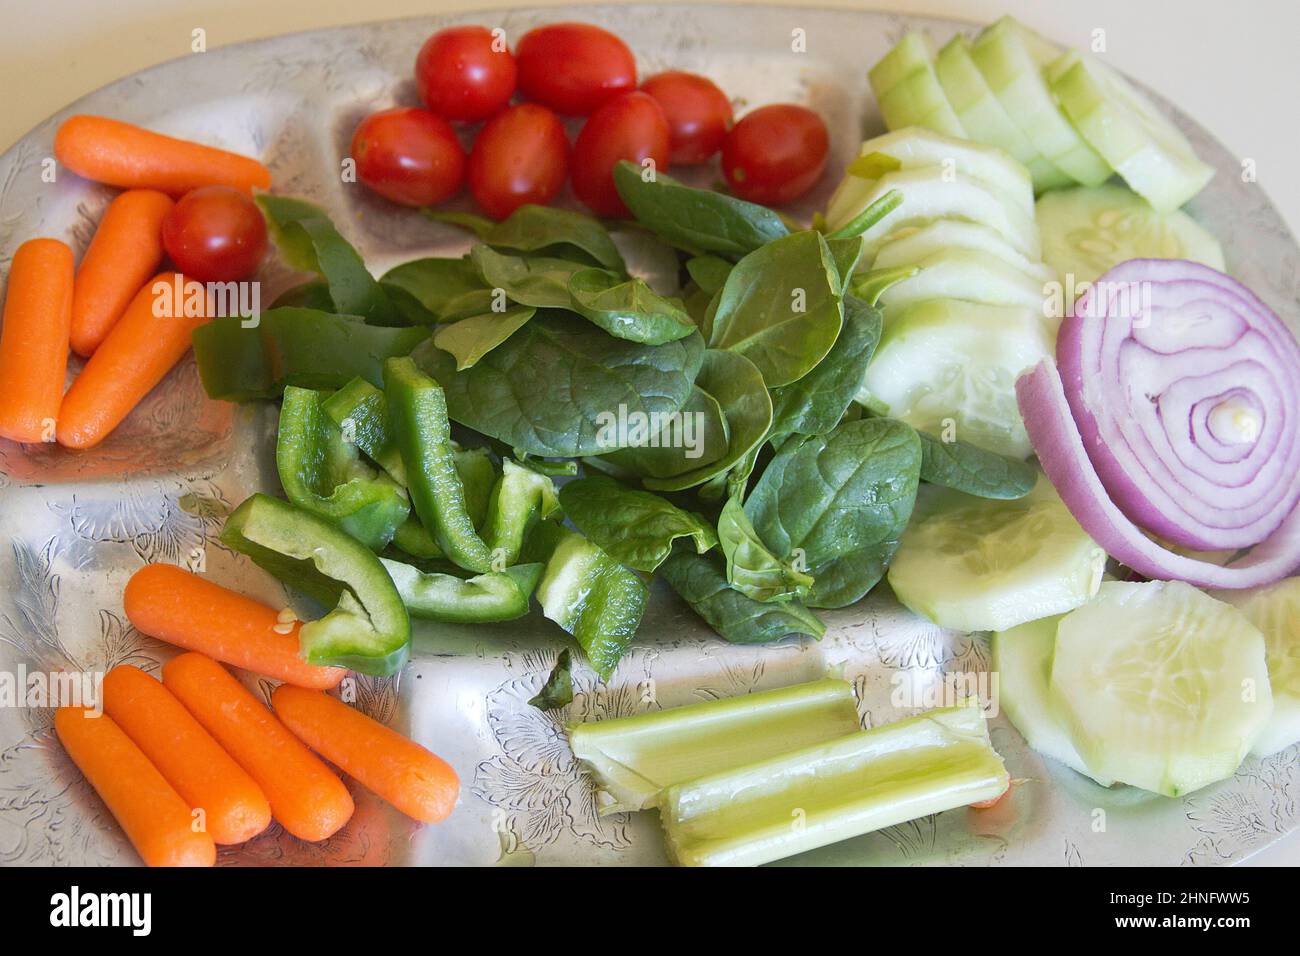 A silver platter offering colorful, snack-sized, raw organic spinach, cucumbers, plum tomatoes, red onion, baby carrots, celery and green bell peppers Stock Photo